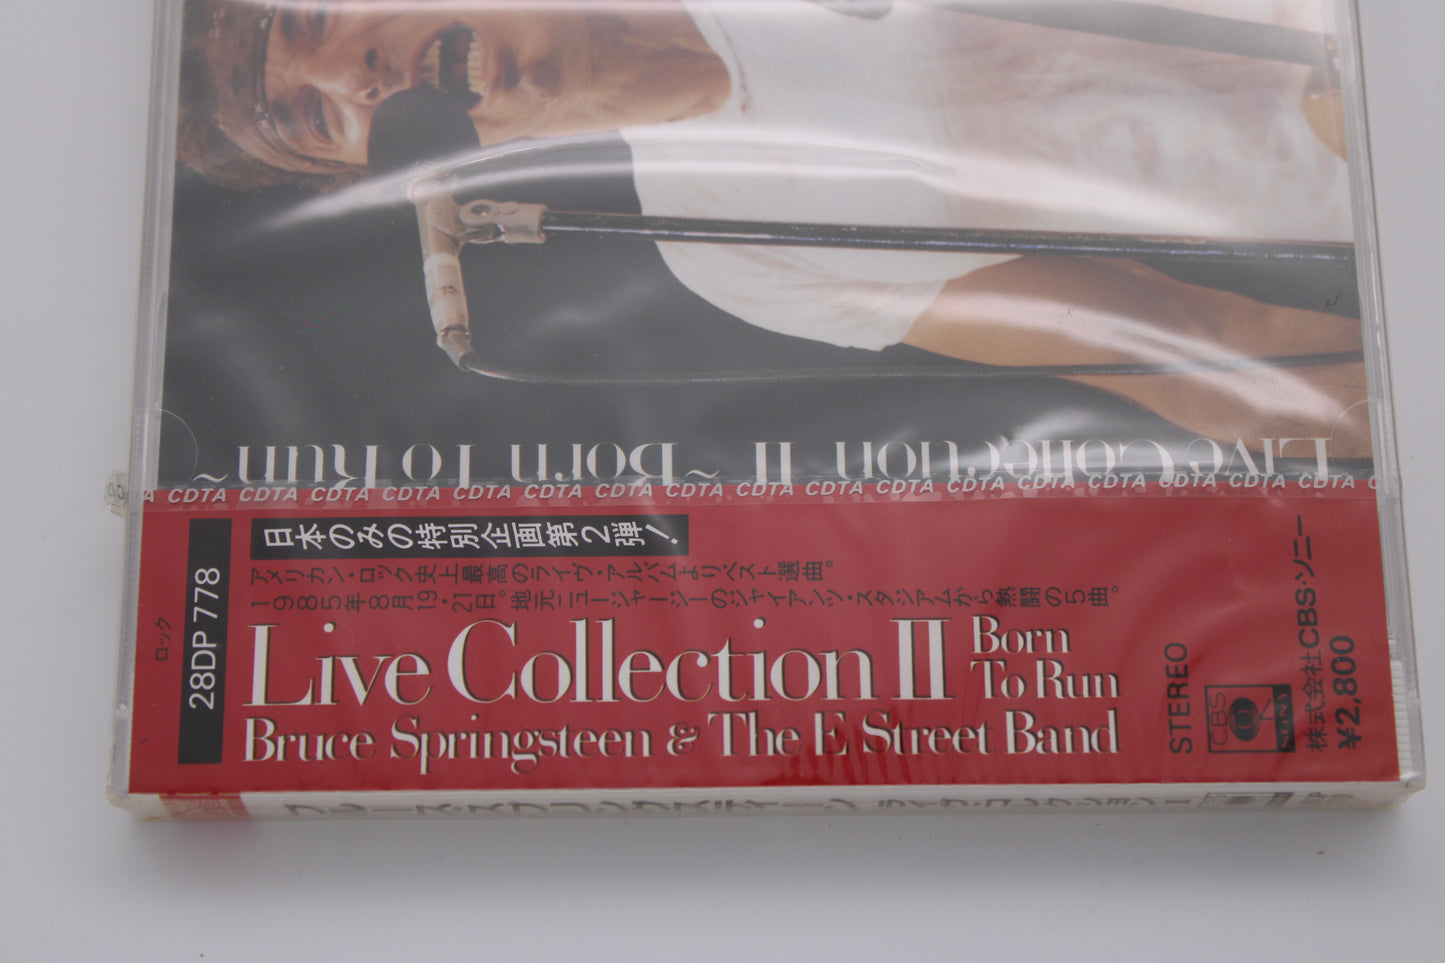 Springsteen Live Collection & Live Collection II - CDs Sealed - 2 Japan CD Releases